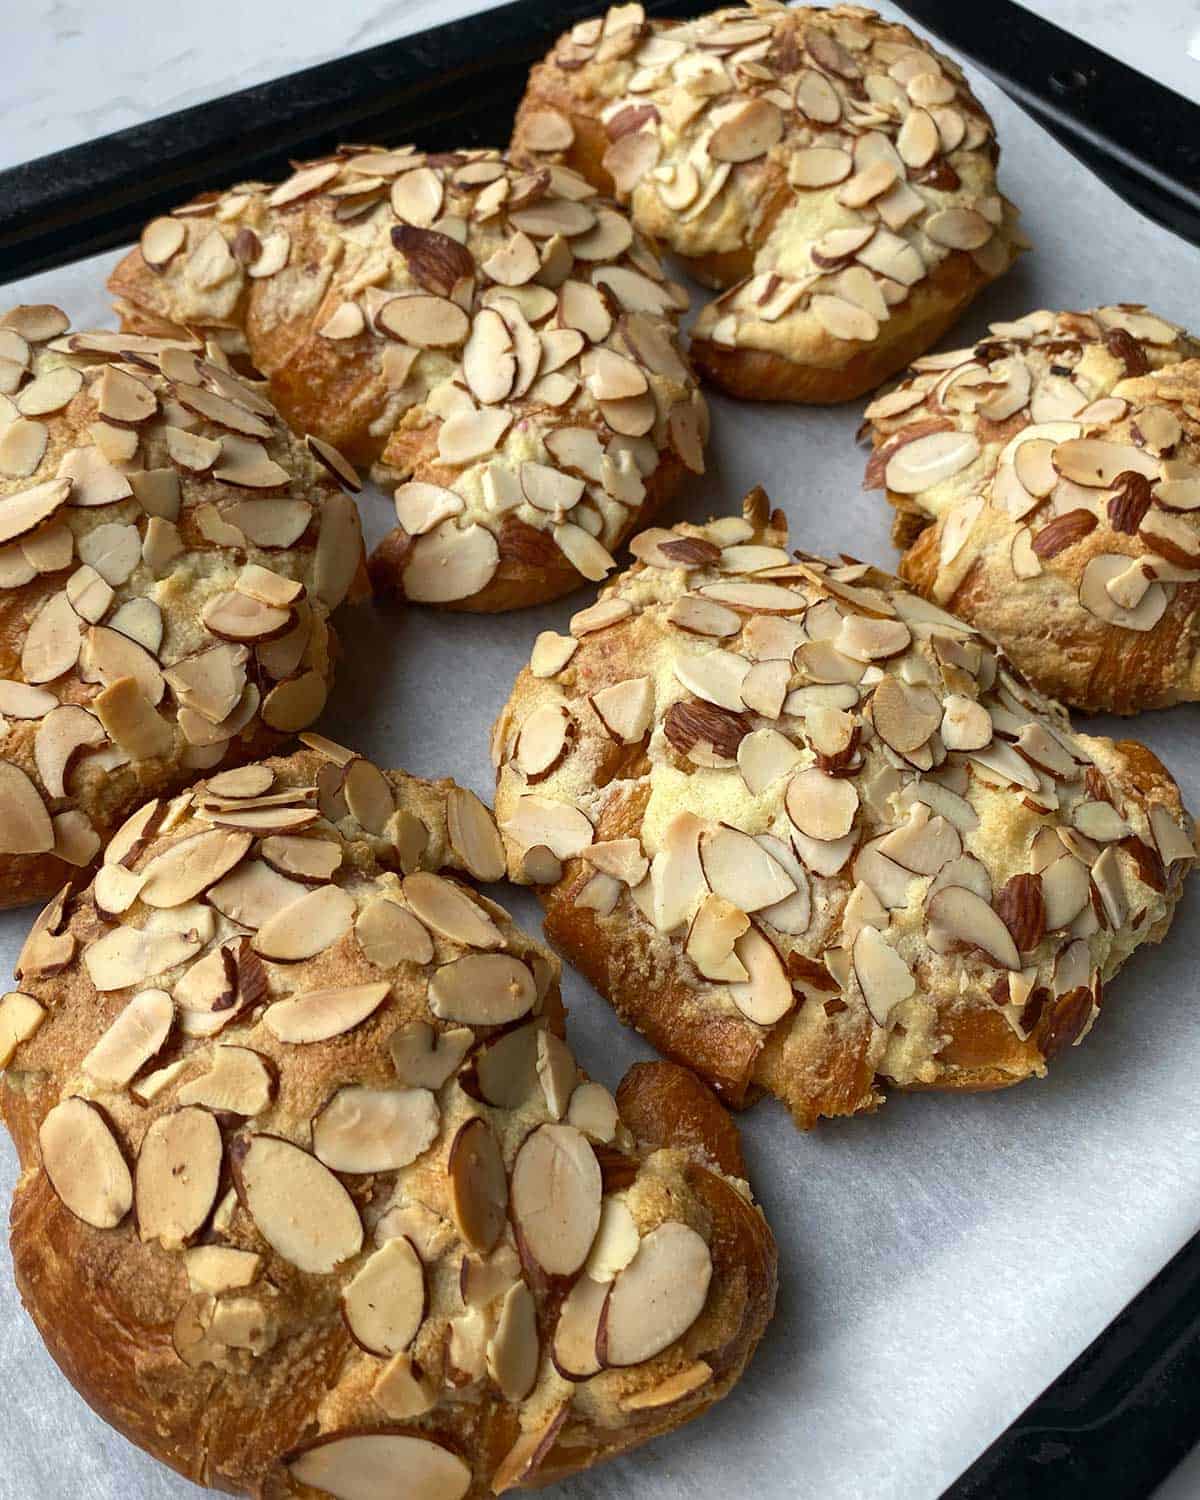 A tray of cooked Almond Croissants.